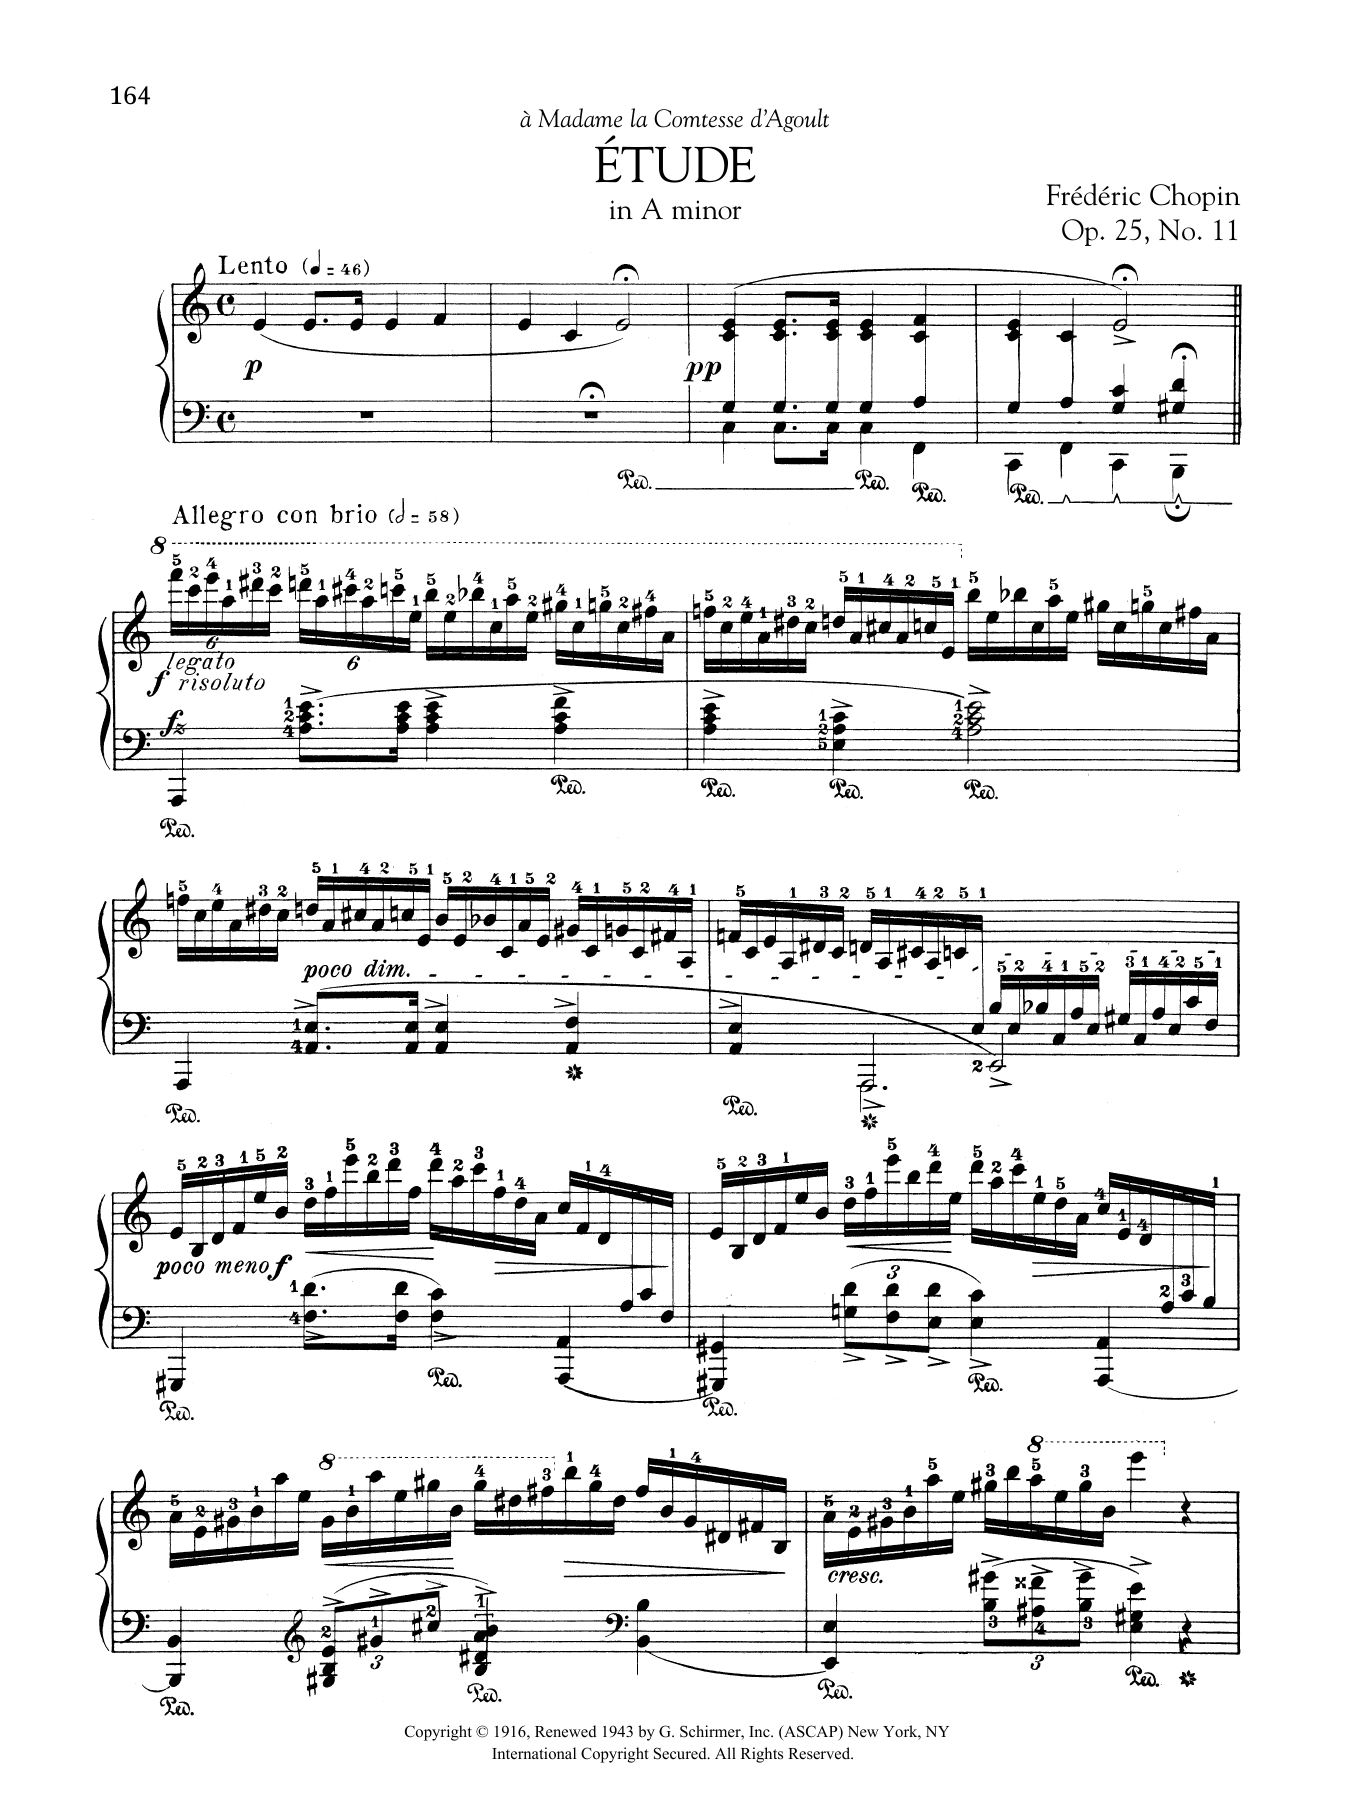 Download Frederic Chopin Etude in A minor, Op. 25, No. 11 Sheet Music